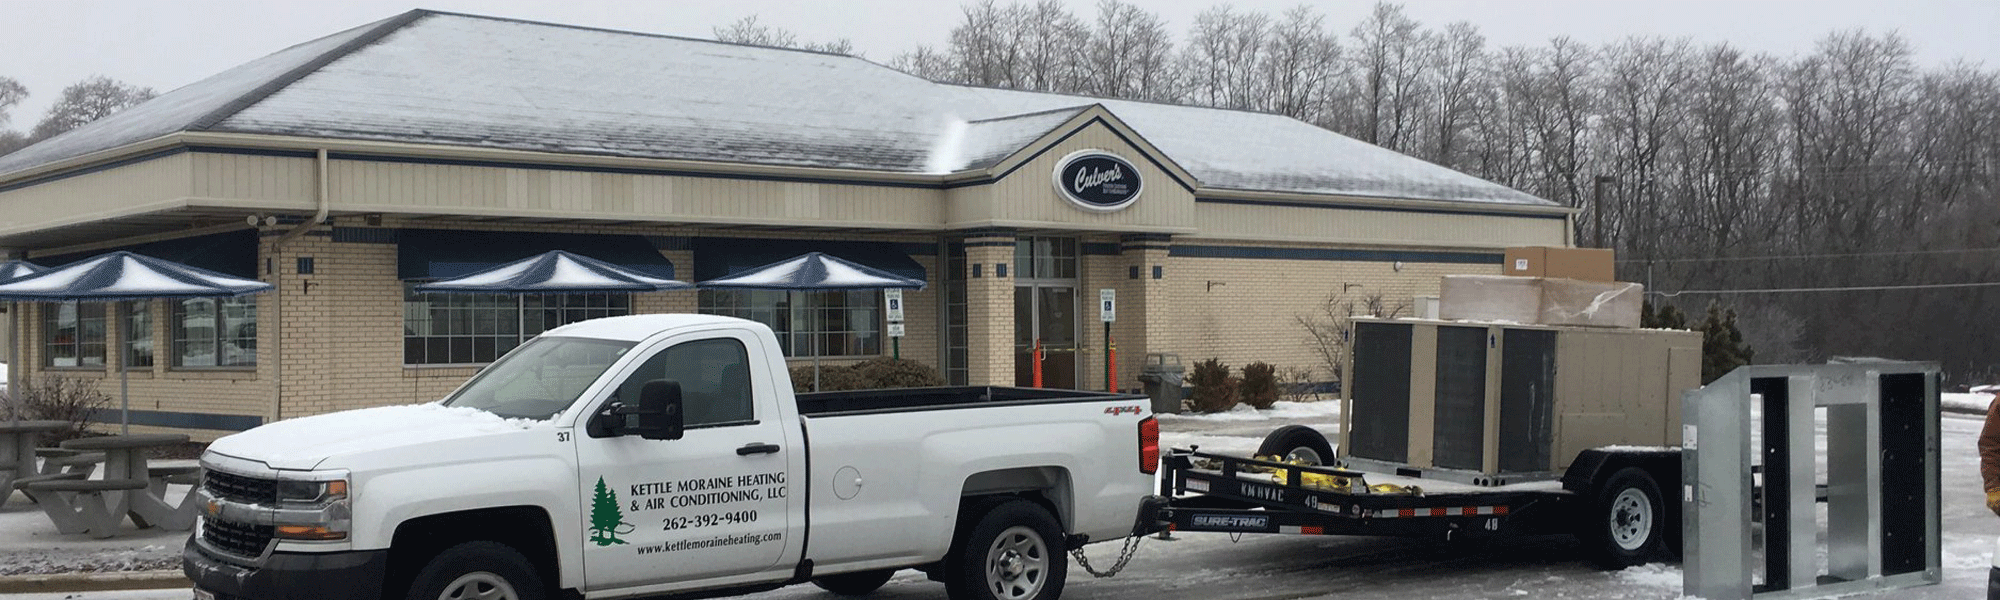 Kettle Moraine Heating and Air Conditioning Delivering New Equipment